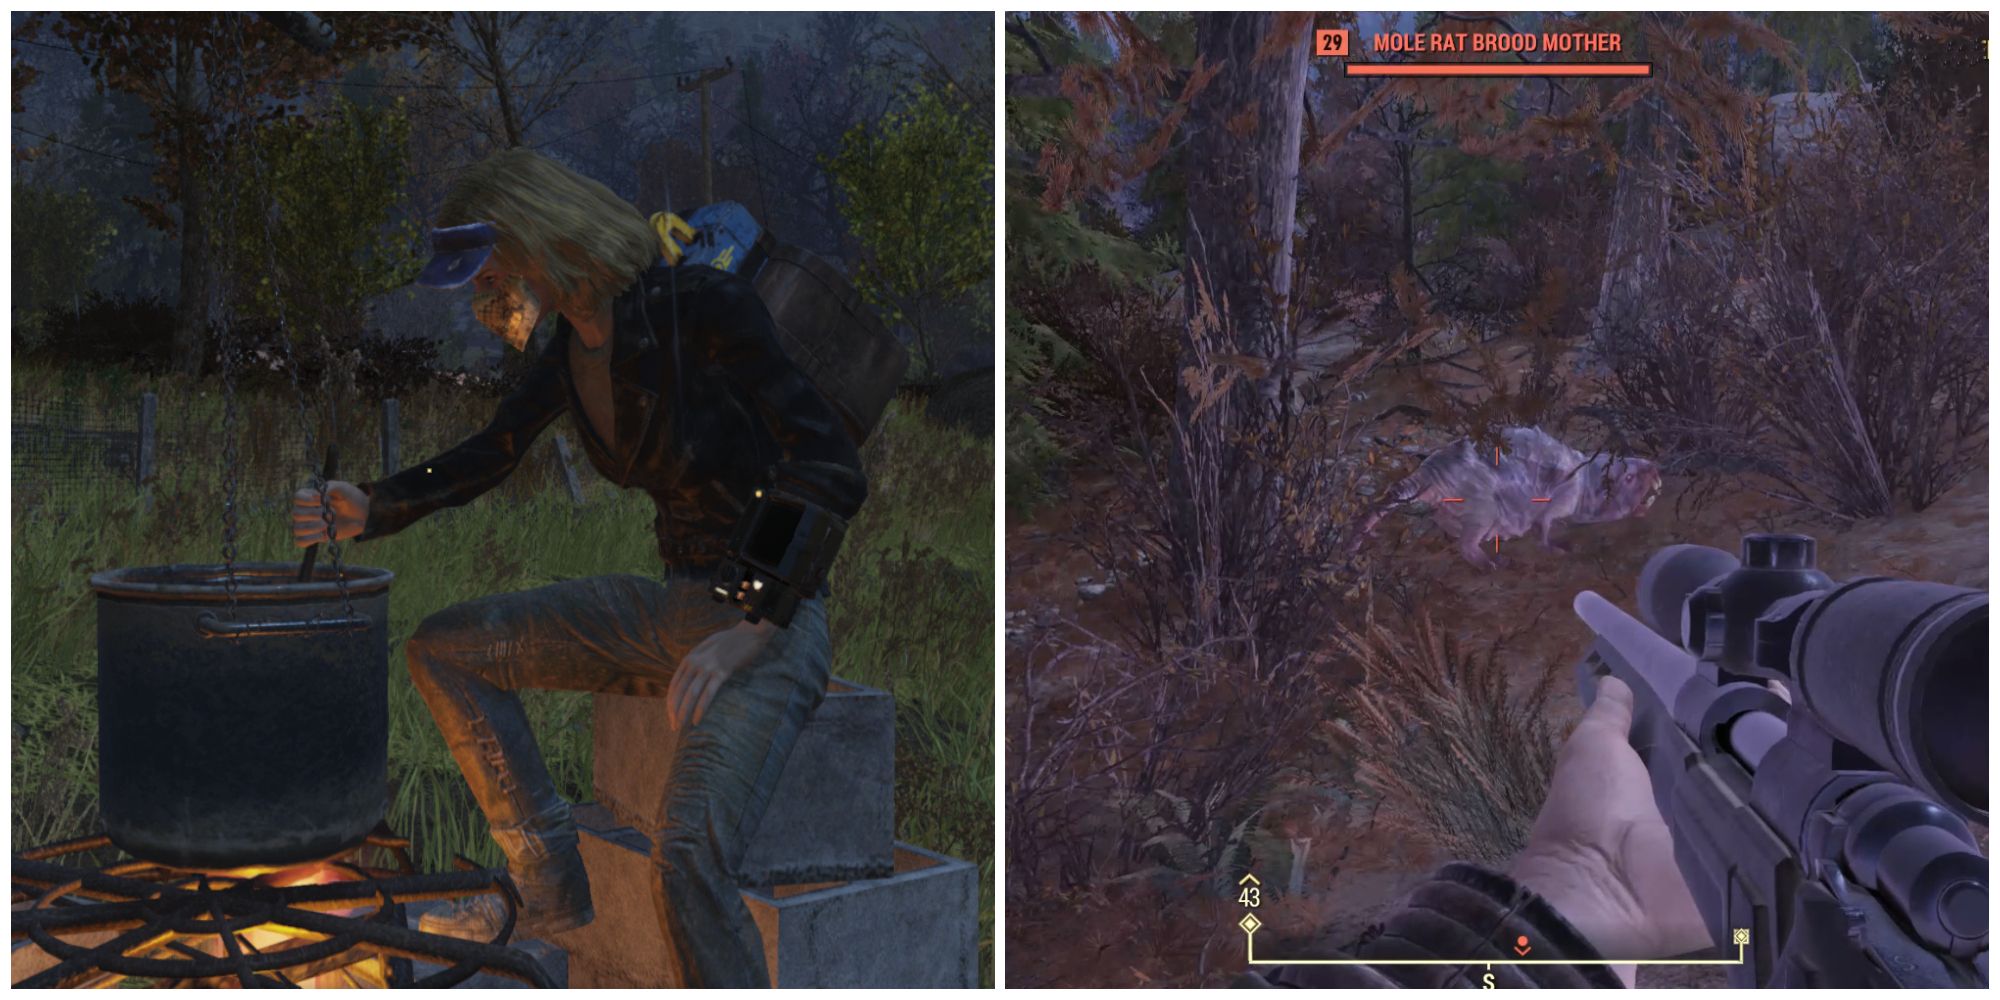 Split image of a character cooking alone and a character defeating mole enemies alone in an event in Fallout 76